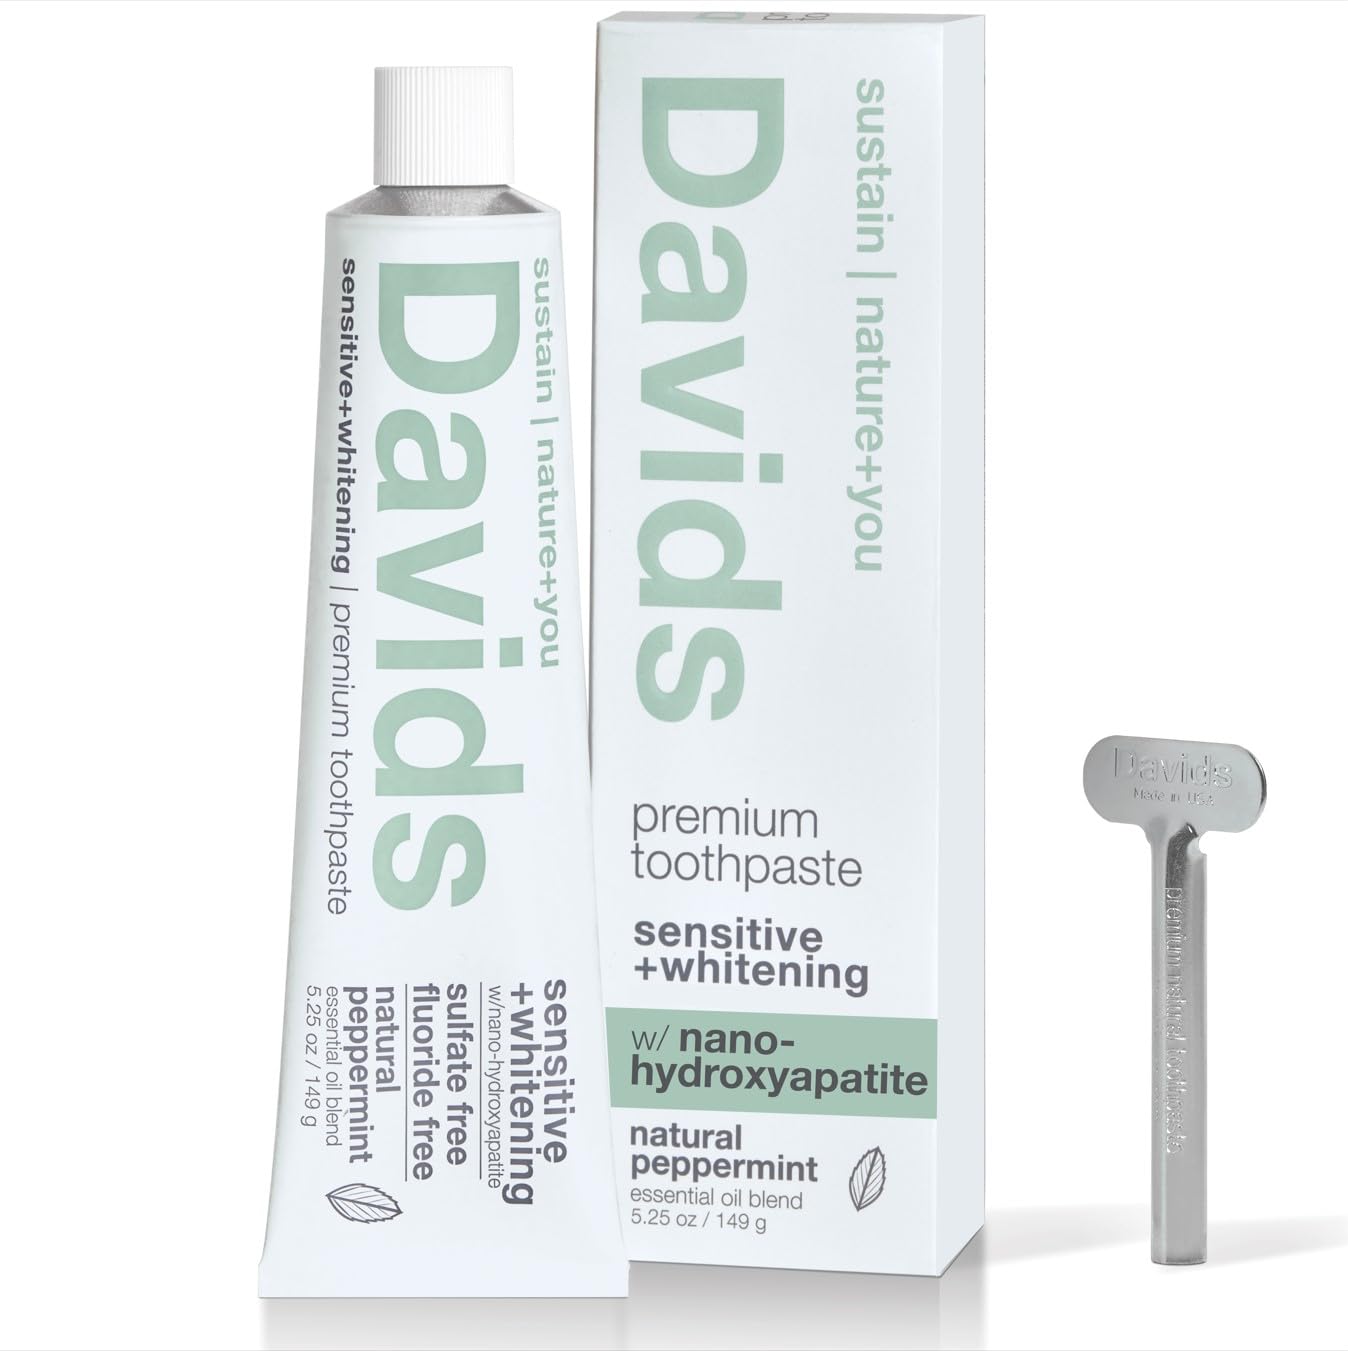 Davids Nano Hydroxyapatite Natural Toothpaste for Sensitivity, Peppermint, Fluoride Free, SLS Free, Remineralize Enamel, Gentle Whitening, Toothpaste Squeezer Included, Recyclable Metal Tube, 5.25oz